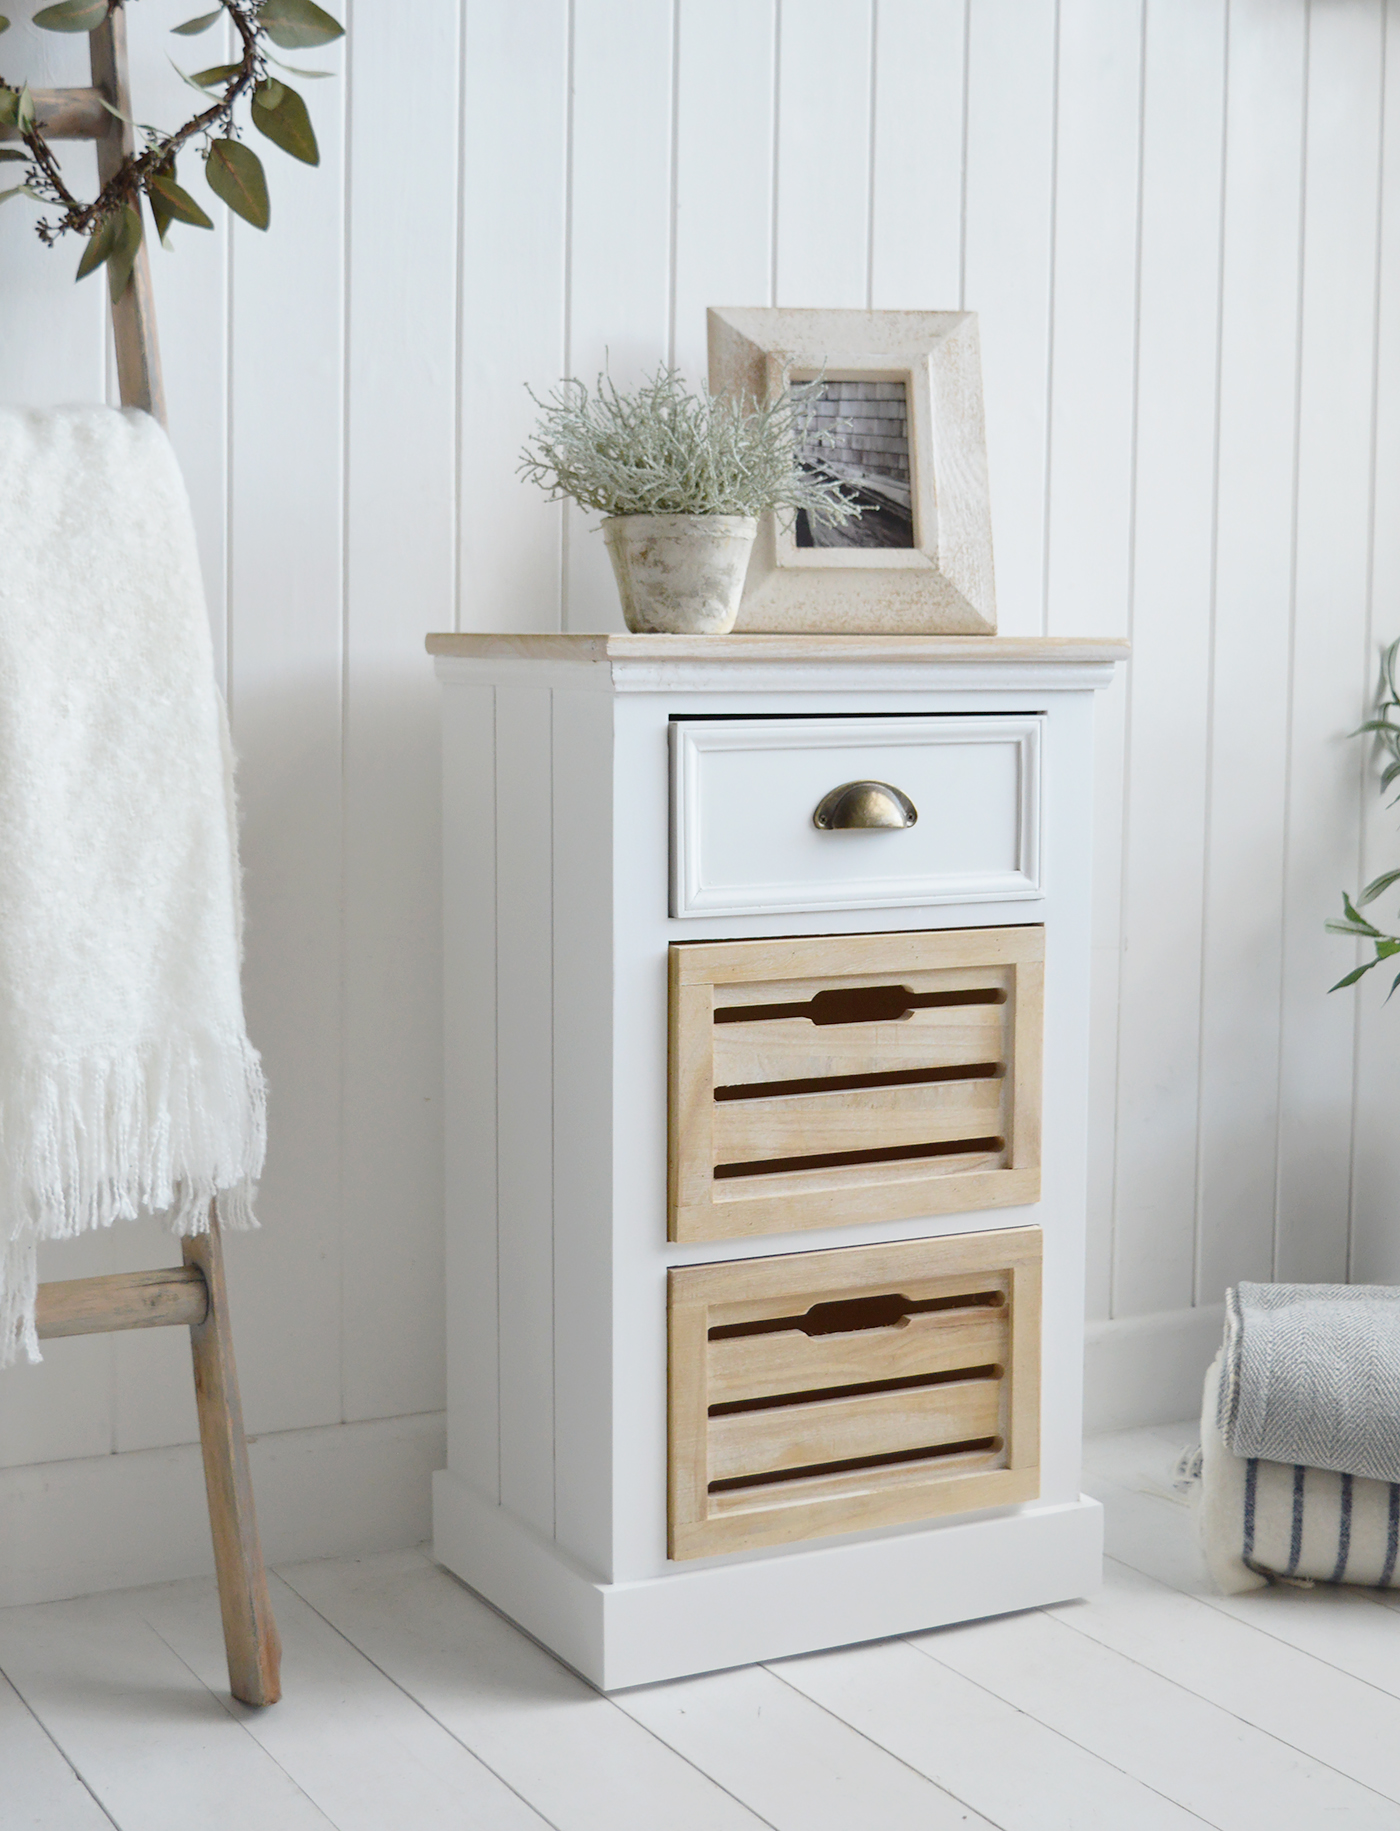 In calming neutral tones, the Southport cabinet with the 3 drawers is perfect in a coastal or country setting